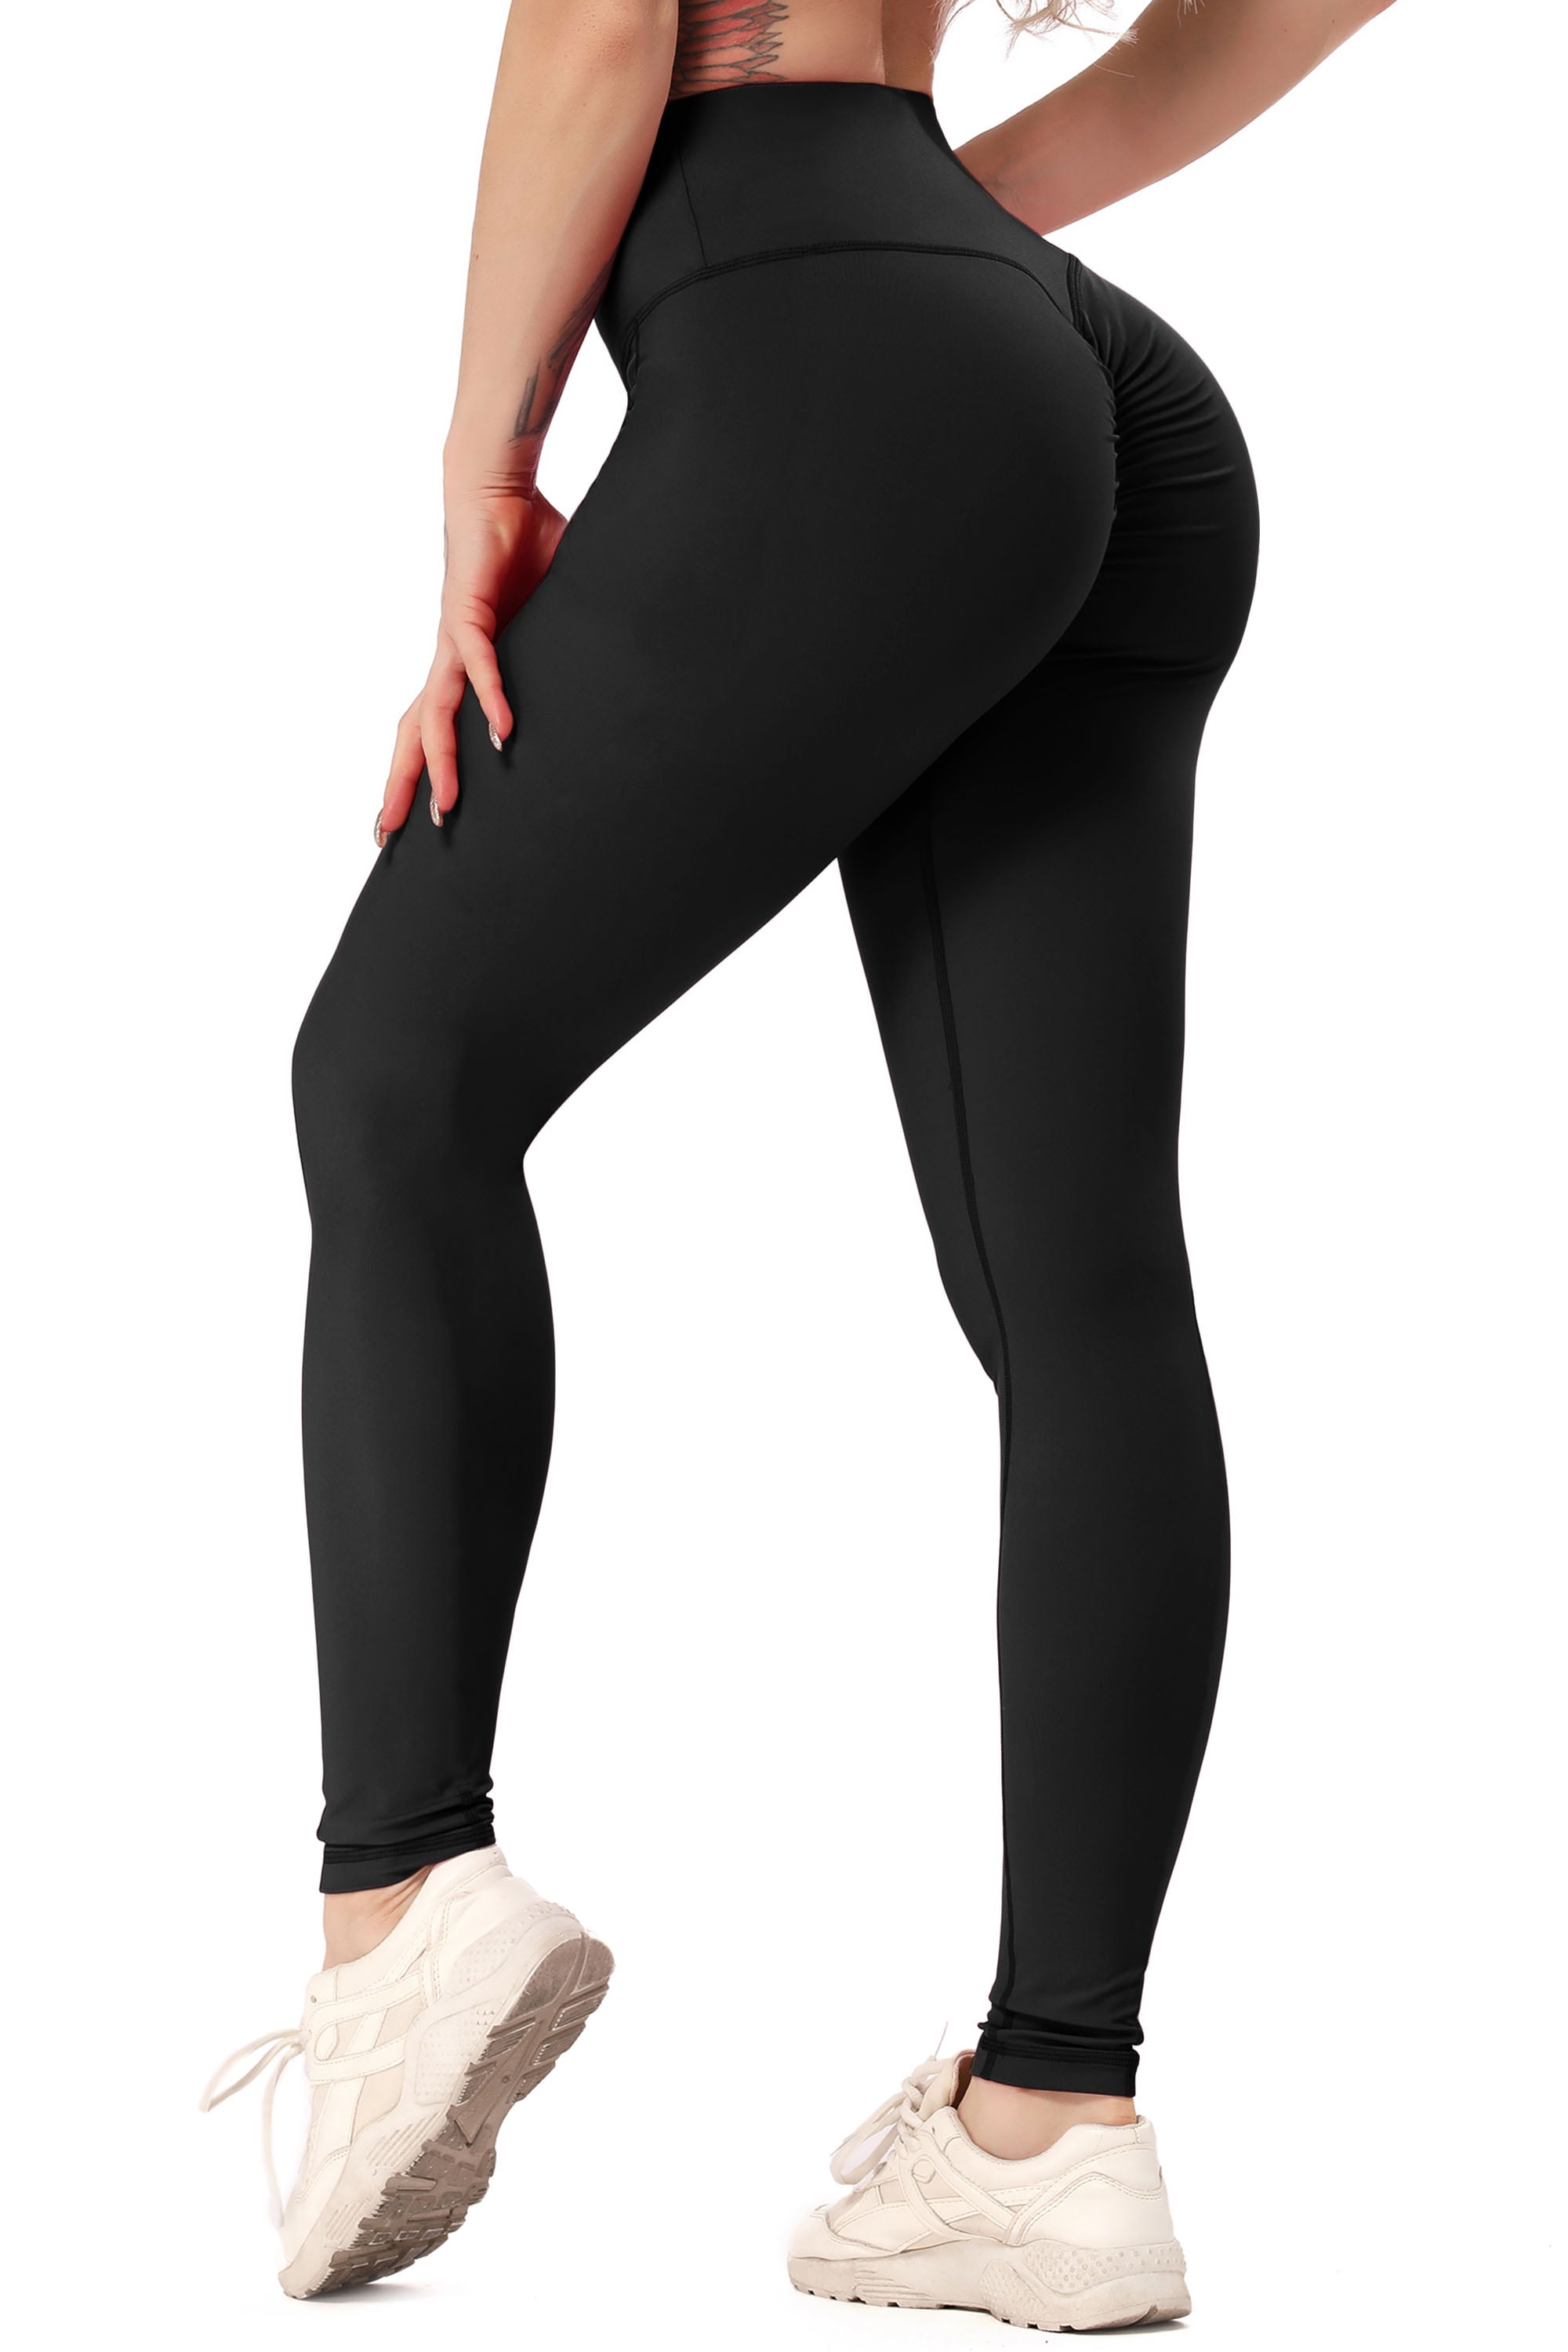 Lovely Cats Yoga Tights Short Running Pants Workout